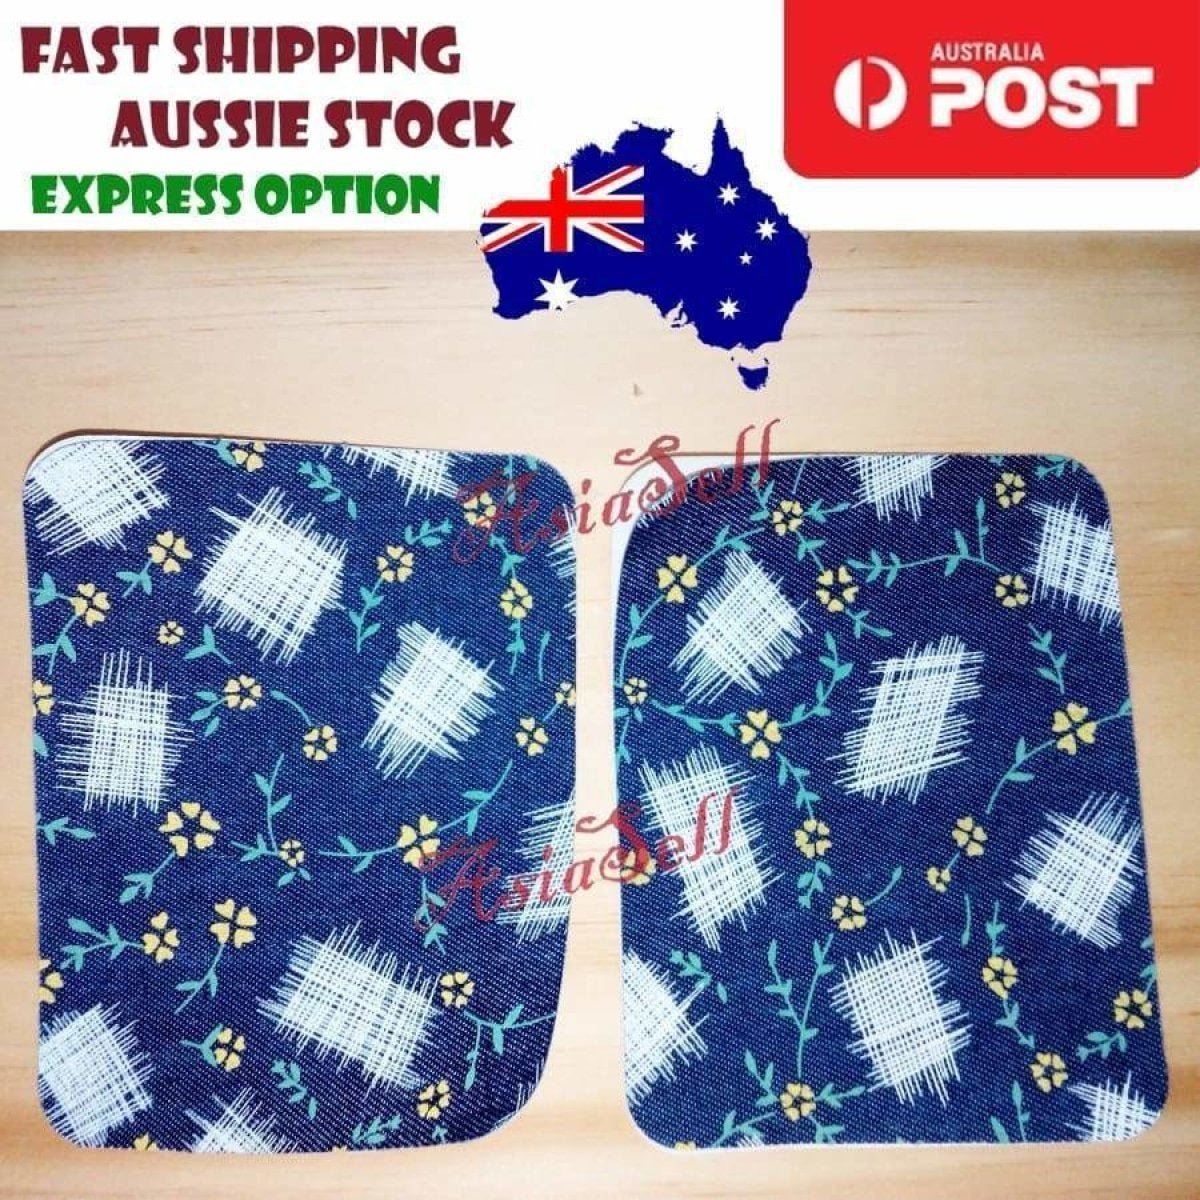 2pcs Iron-on Blue Black Patterned Clothing Patch Pattern Fabric Repair Denim Jacket Jeans - Flowers - - Asia Sell